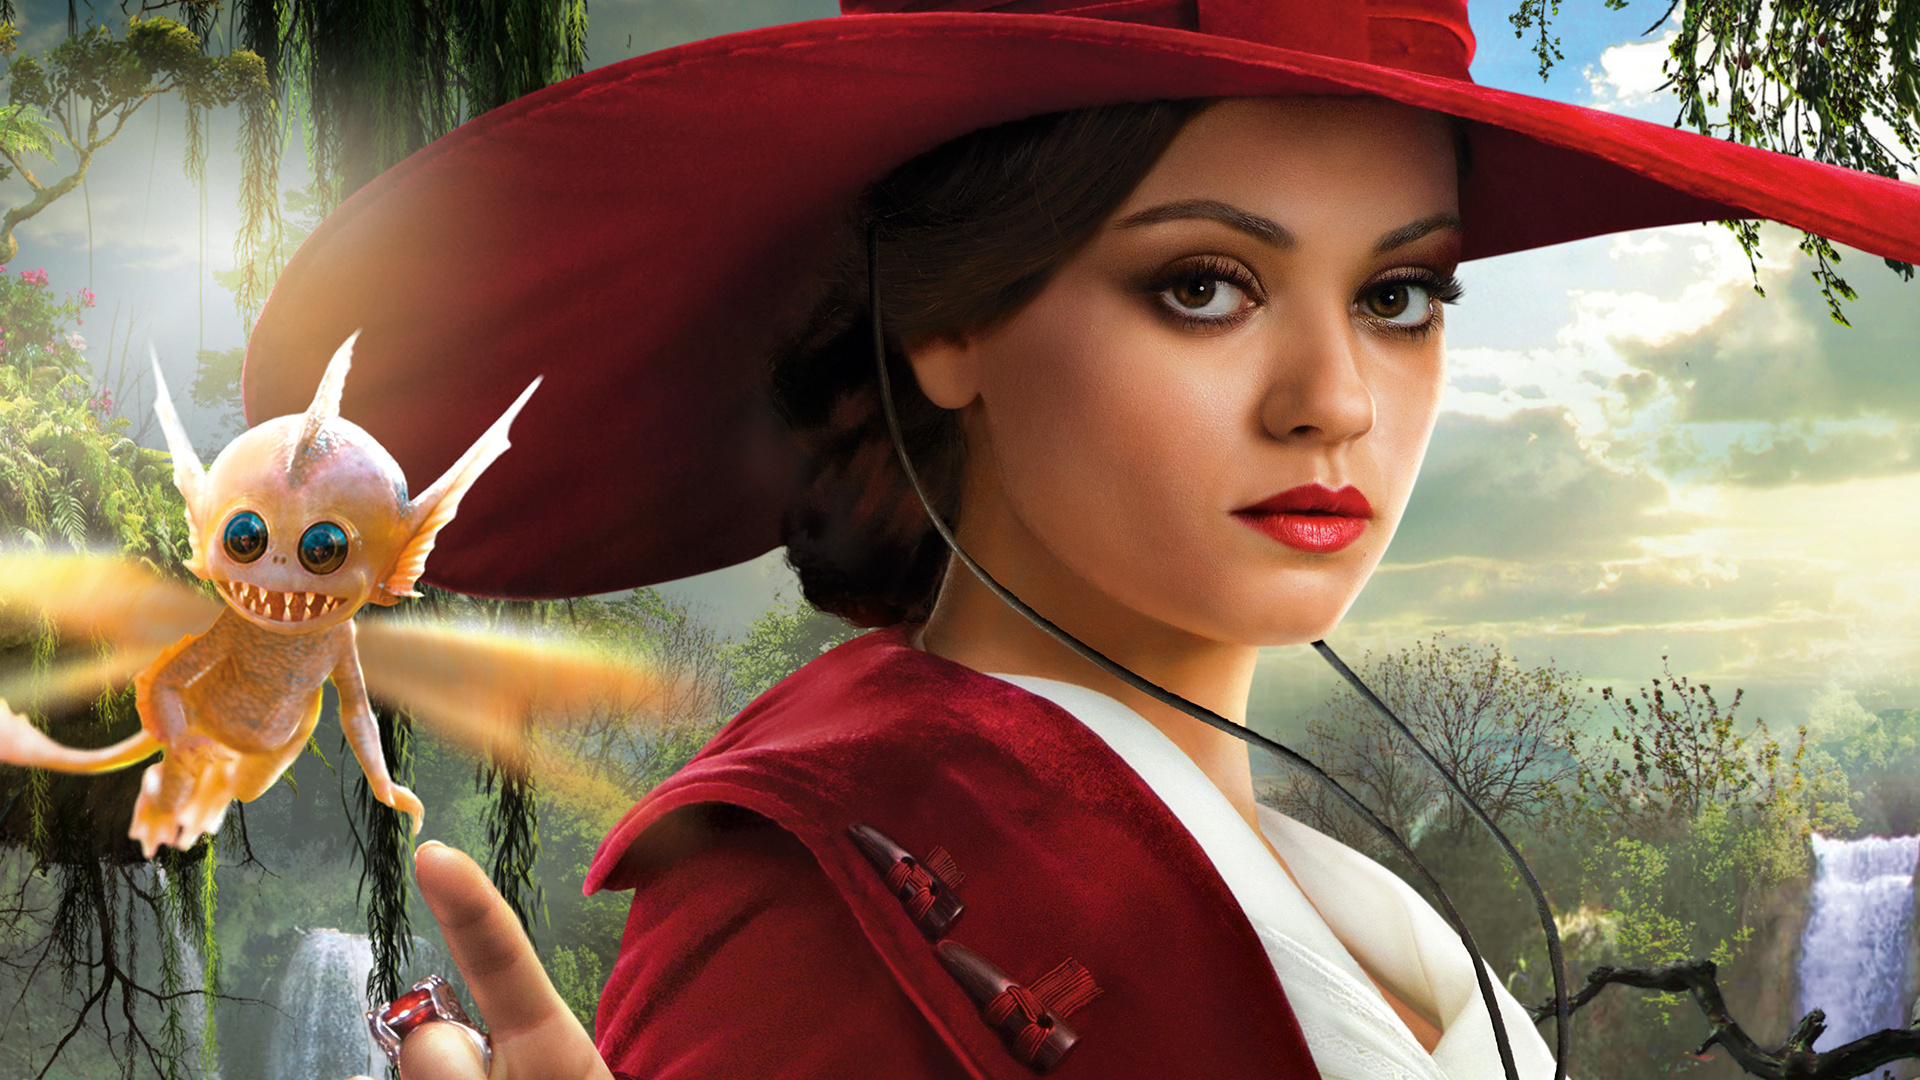 Wallpaper Oz the Great and Powerful, 2013 movie, Mila Kunis, actress